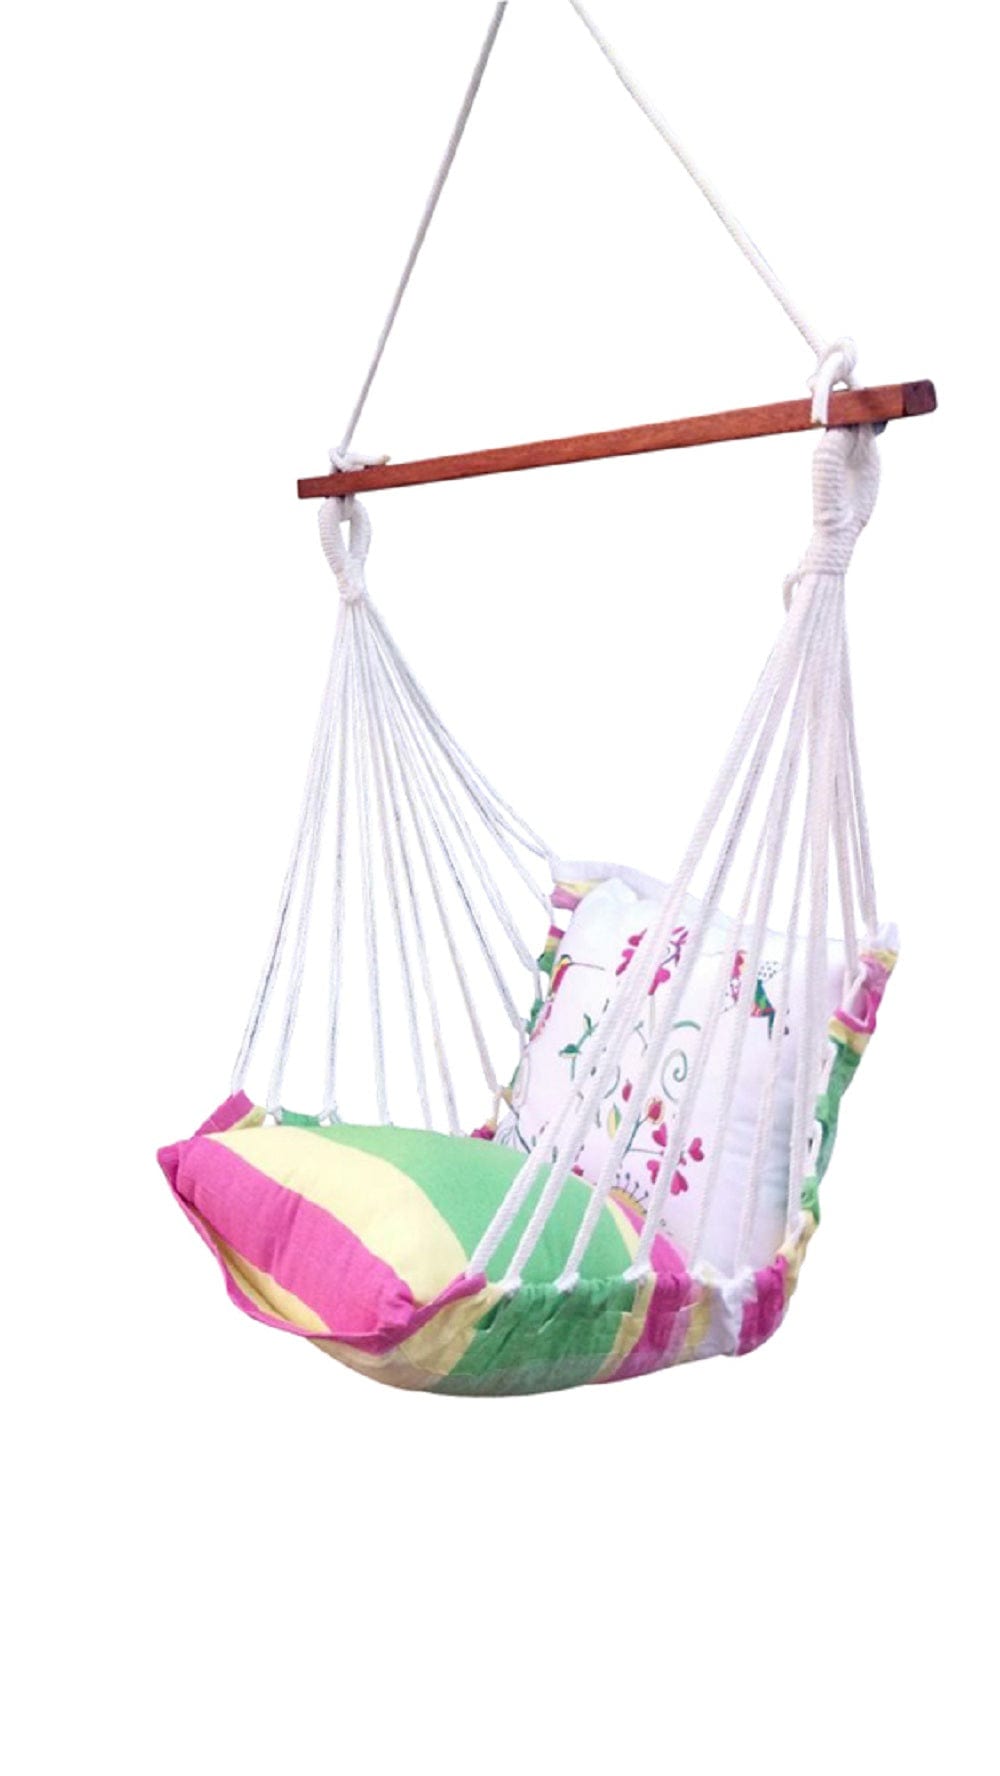 Casual Swing Chair With Printed Cushions, Weight Capacity 113Kg- 100W X 130H cm